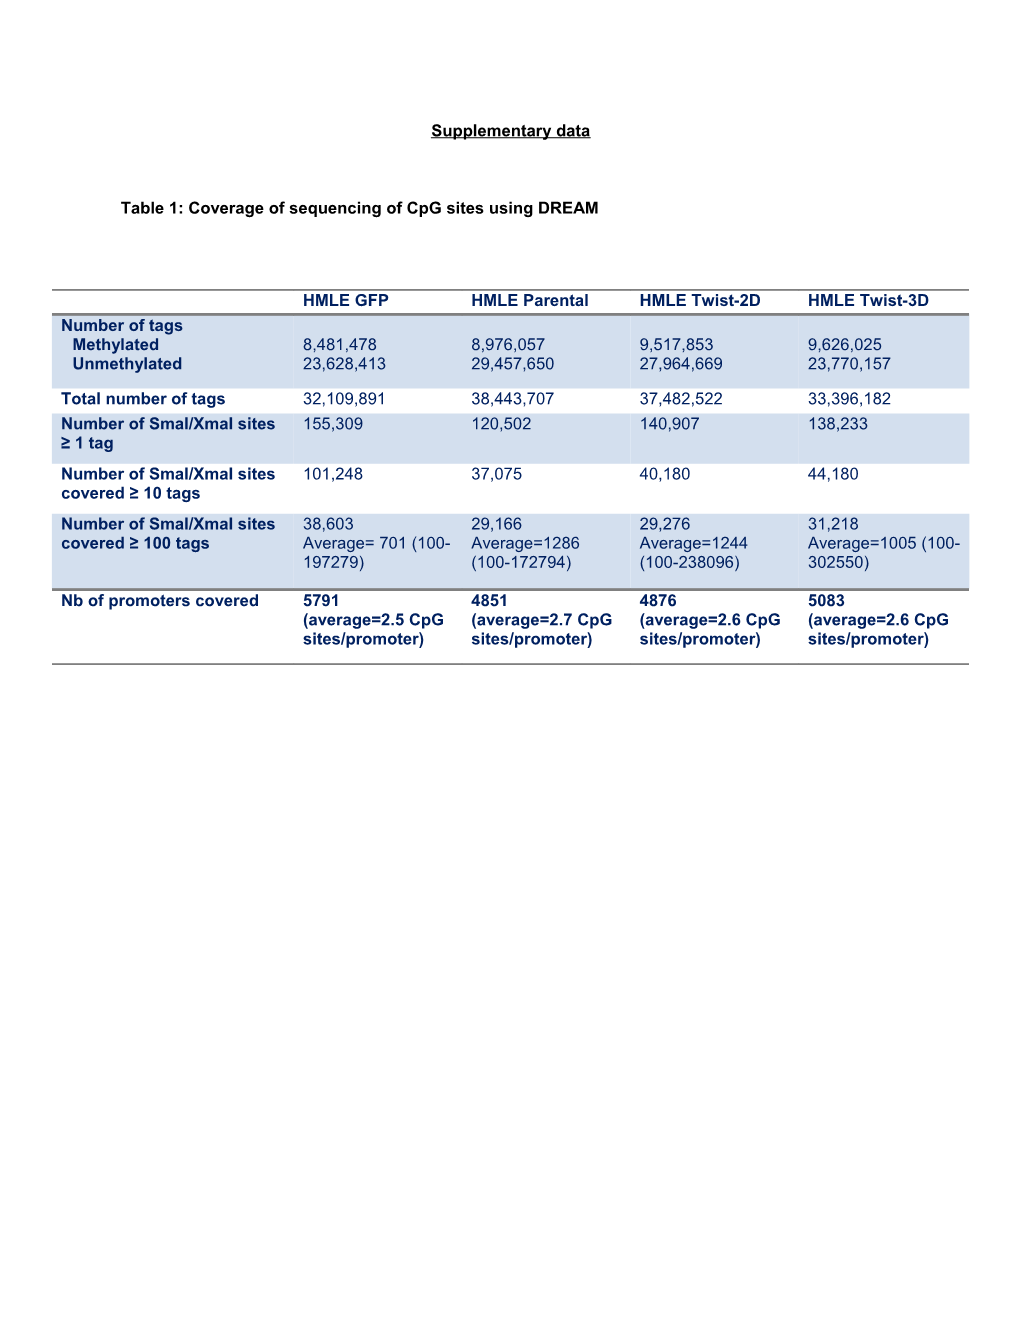 Table 1: Coverage of Sequencing of Cpg Sites Using DREAM